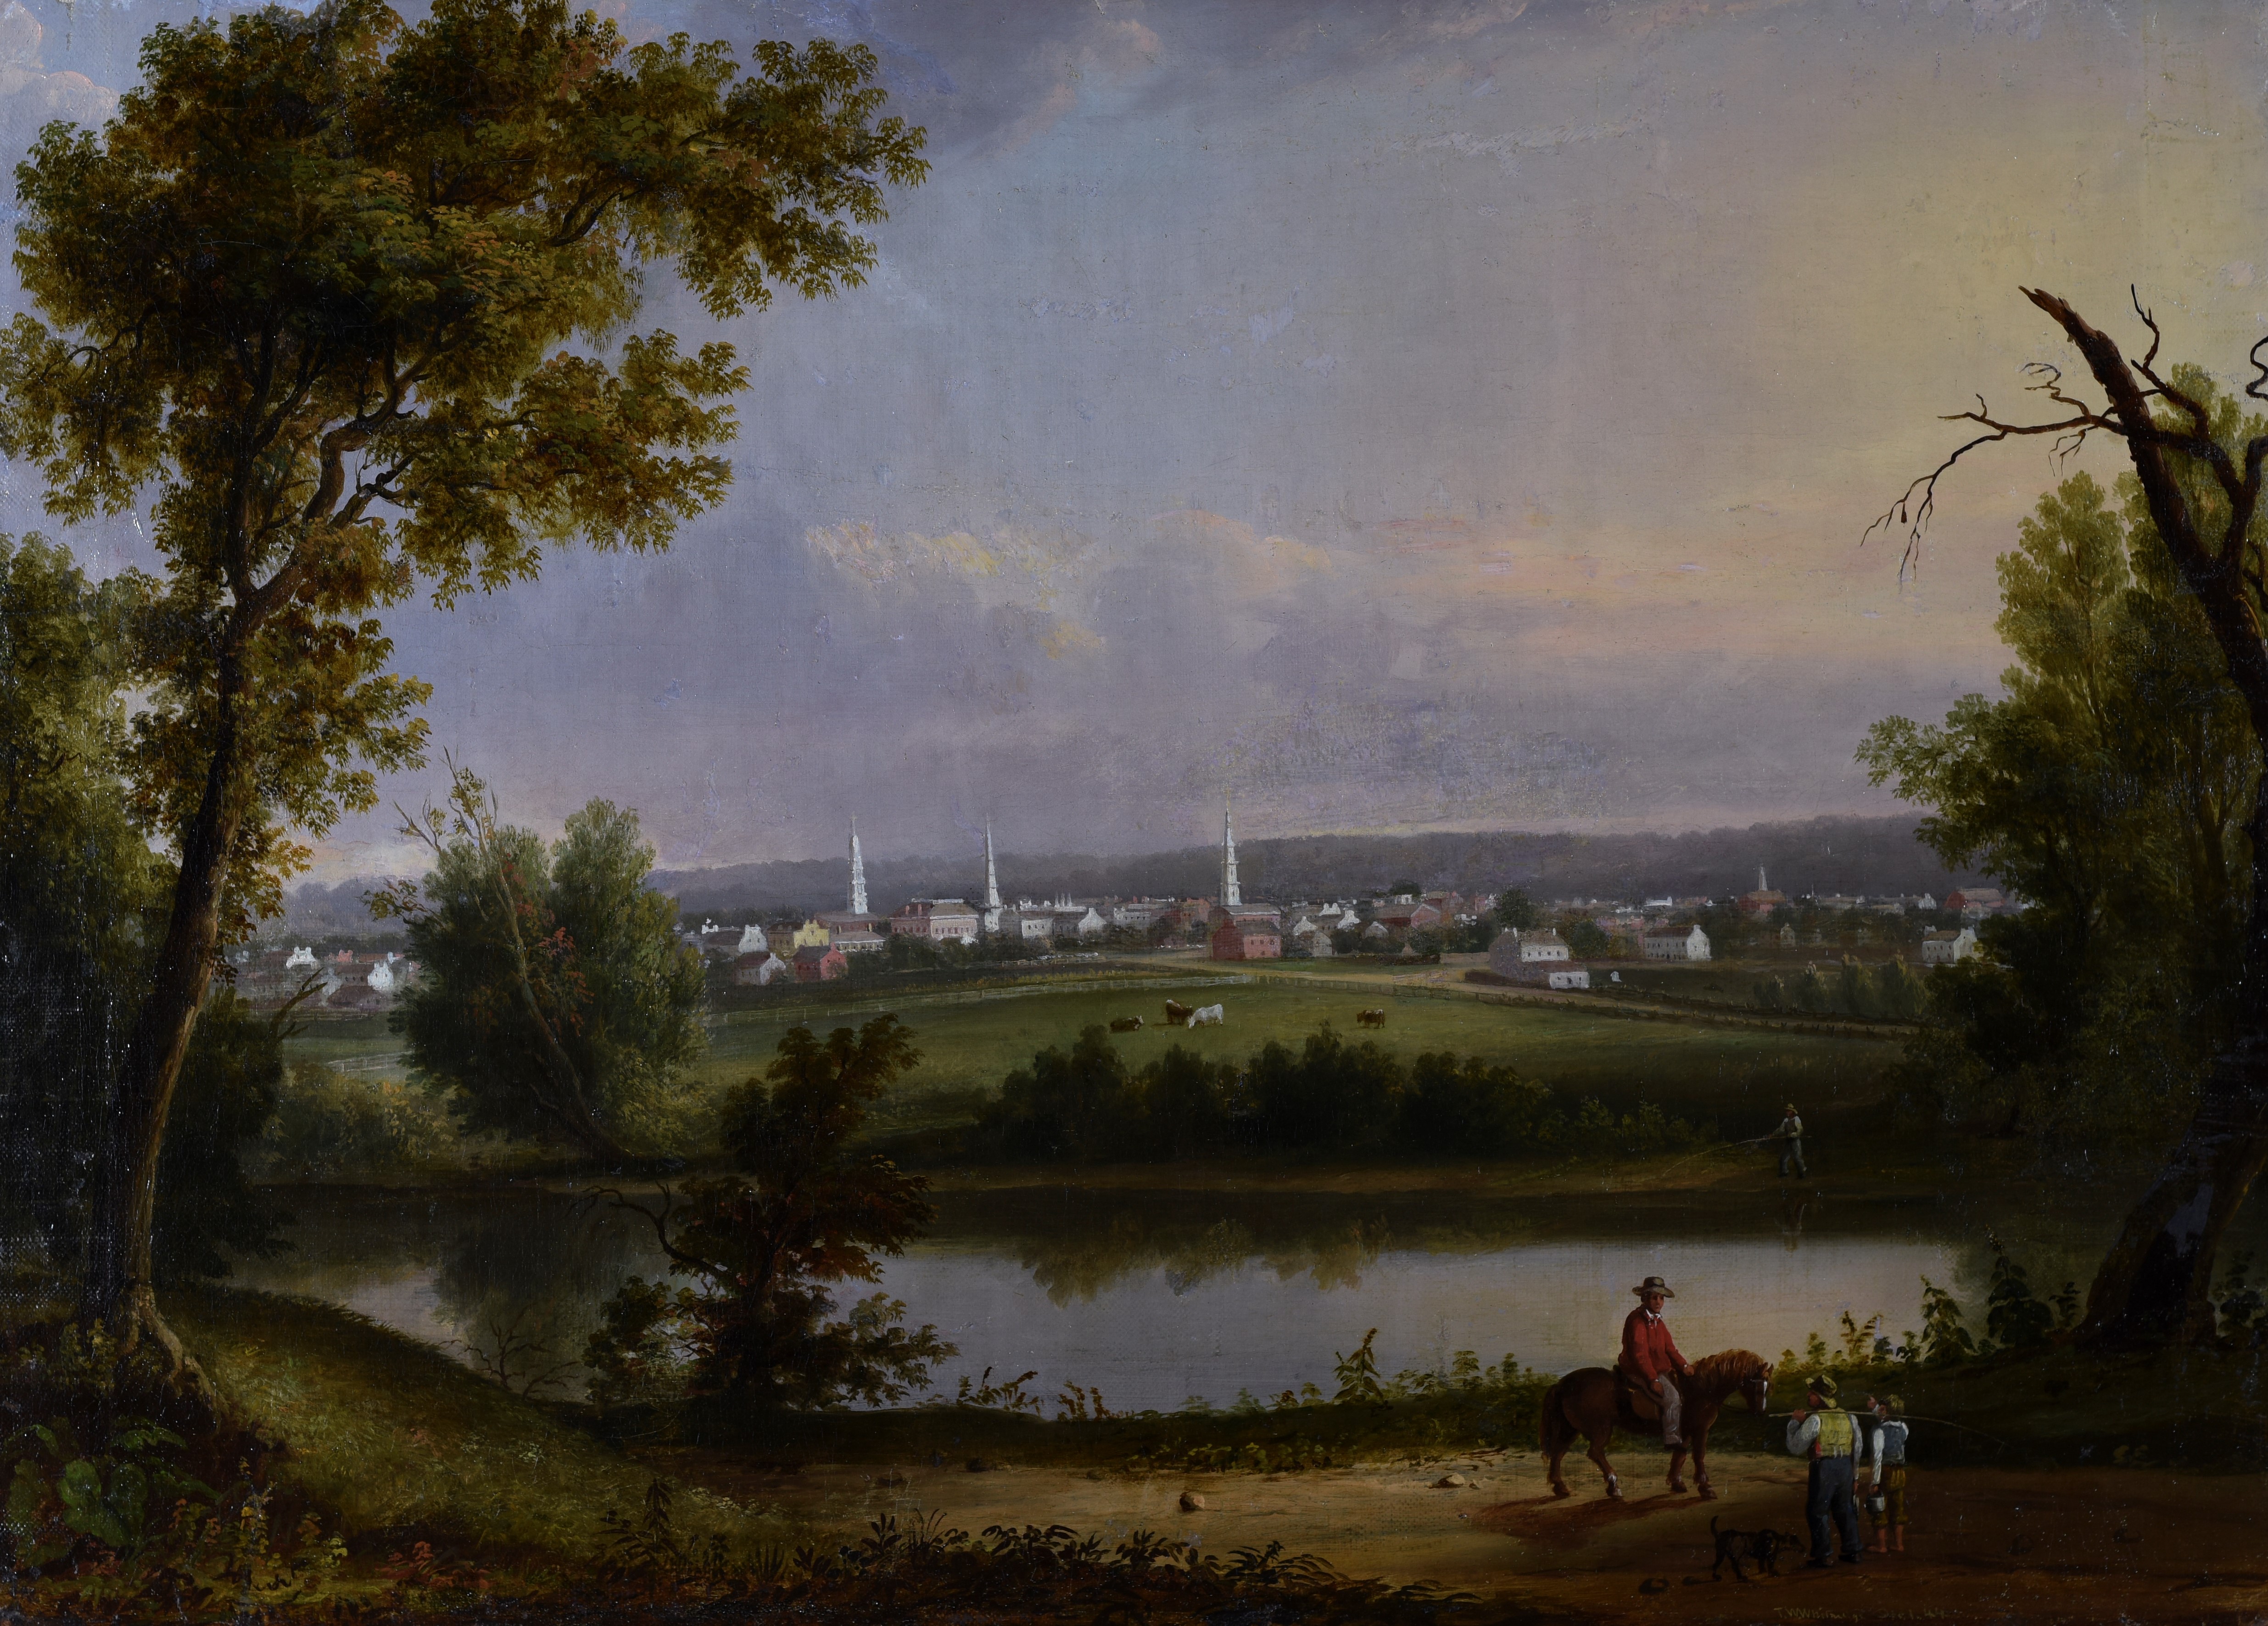 Conservation work on "Dayton from Steele's Hill'' by Thomas Worthington Whittredge included cleaning the painting, repairing damaged areas and correcting improper prior repairs. It's part of the “Art for the Ages: Conservation at DAI” exhibit. CONTRIBUTED